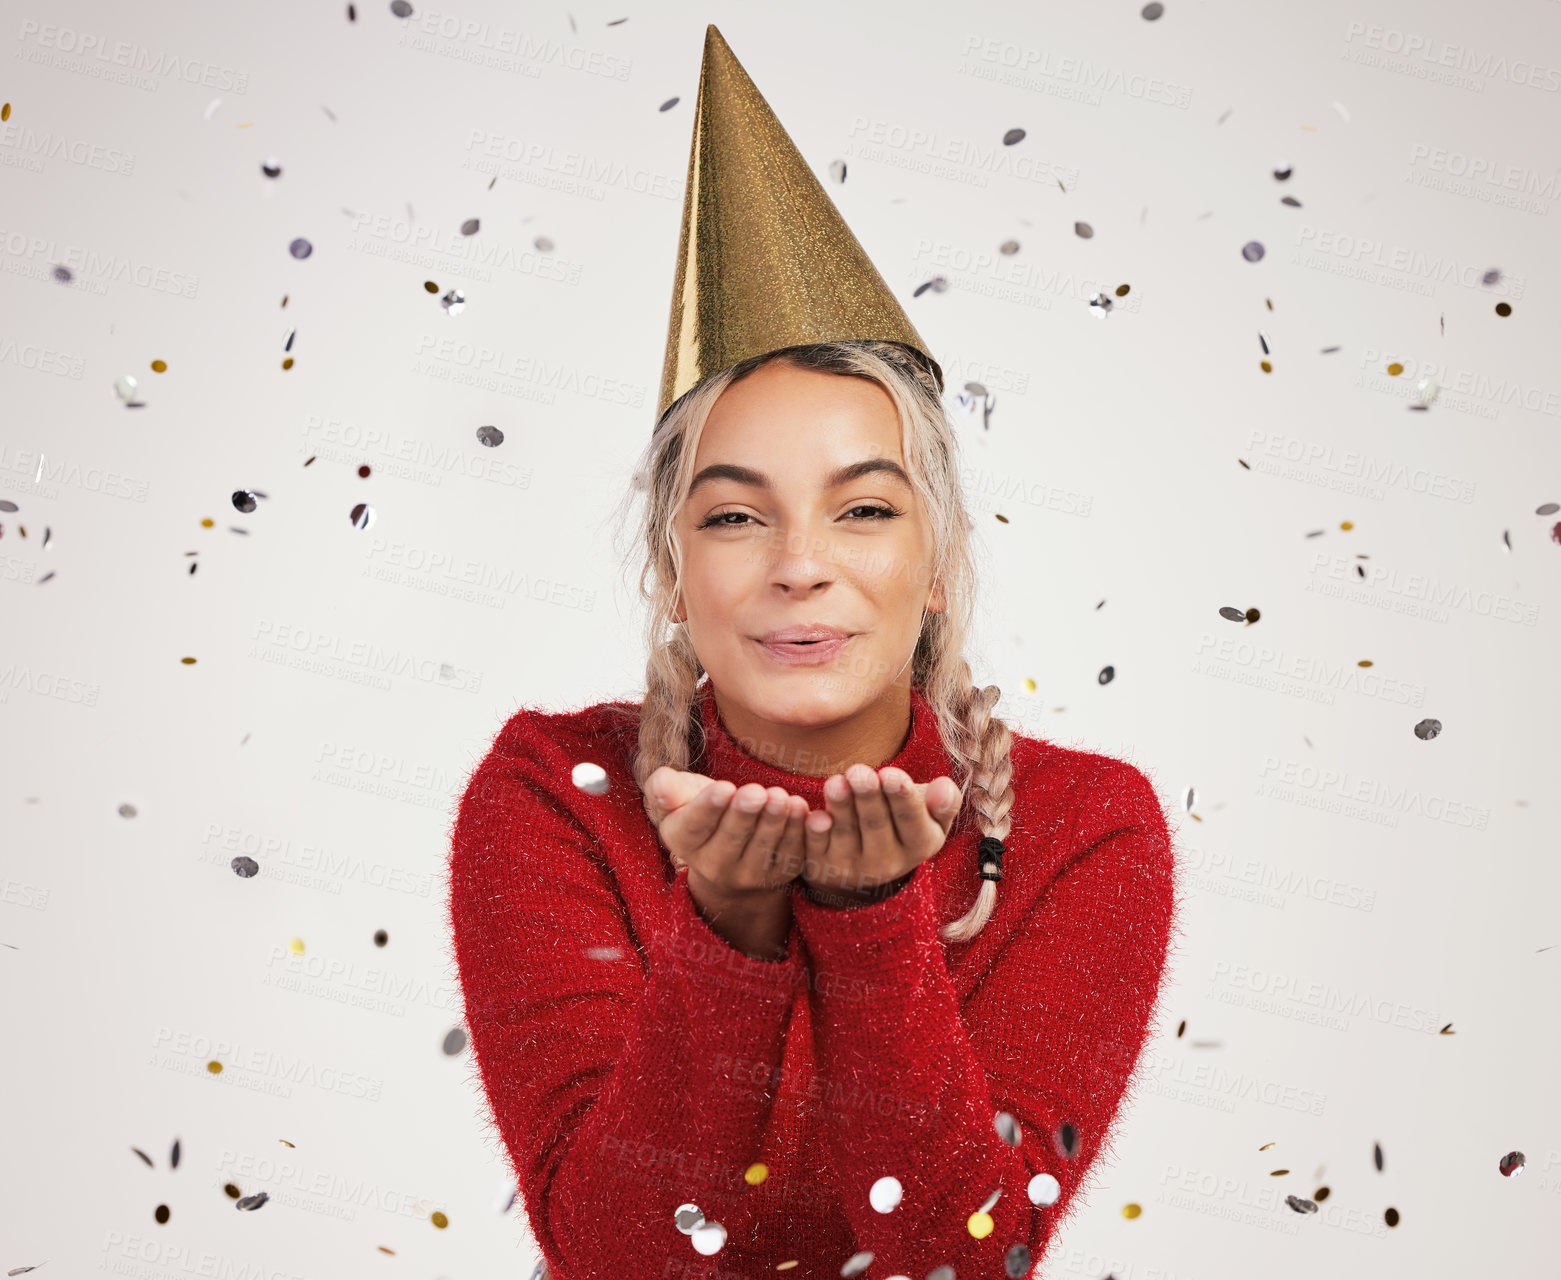 Buy stock photo Studio shot of a young woman wearing a party hat and blowing confetti against a grey background